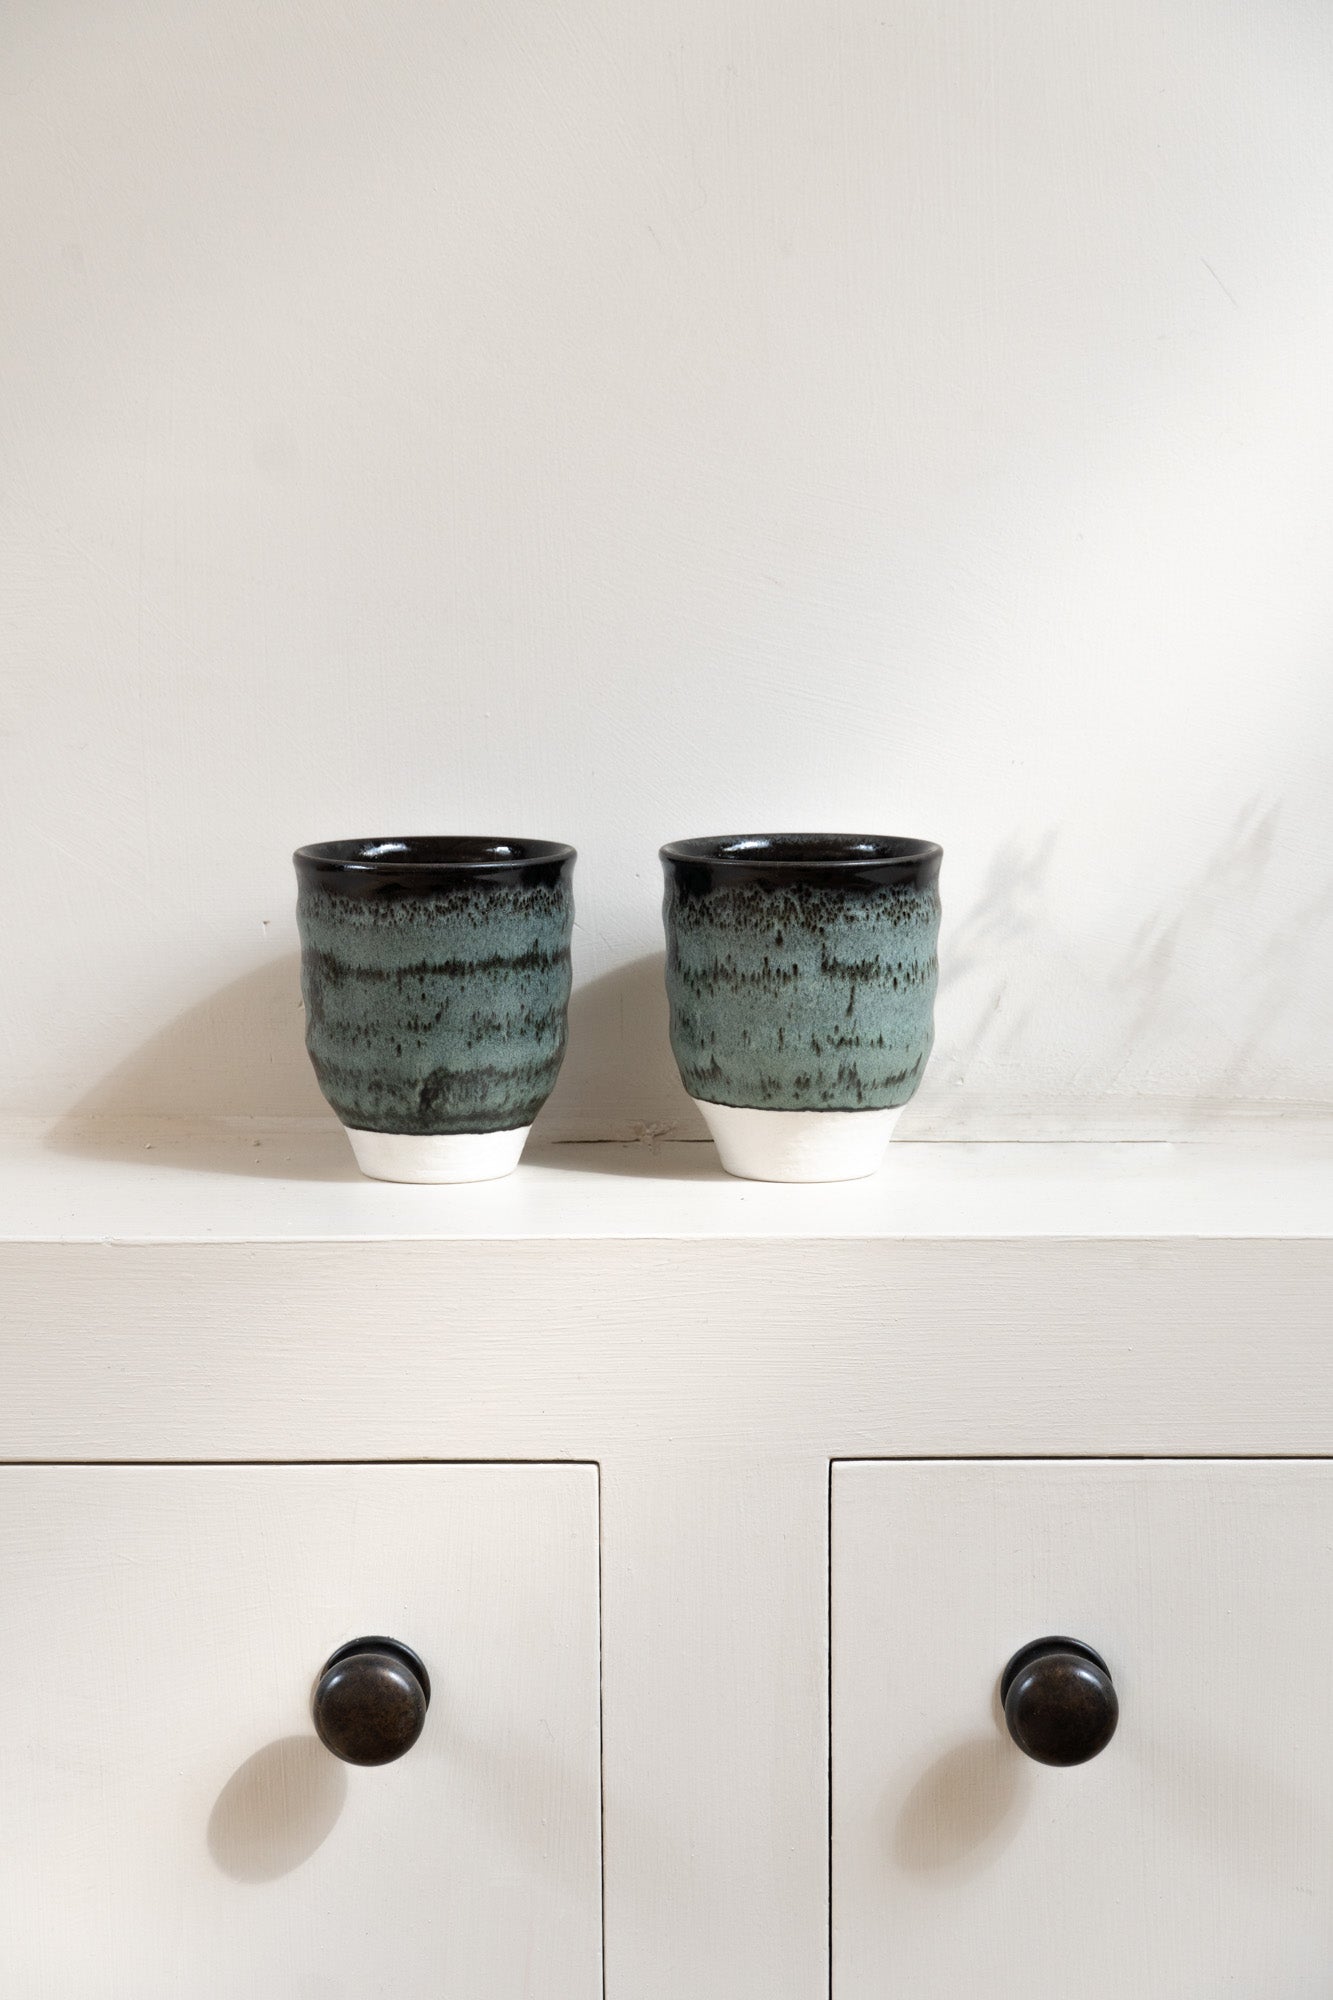 Two Dashi Tumbler in Charbon set on wall cabinet.